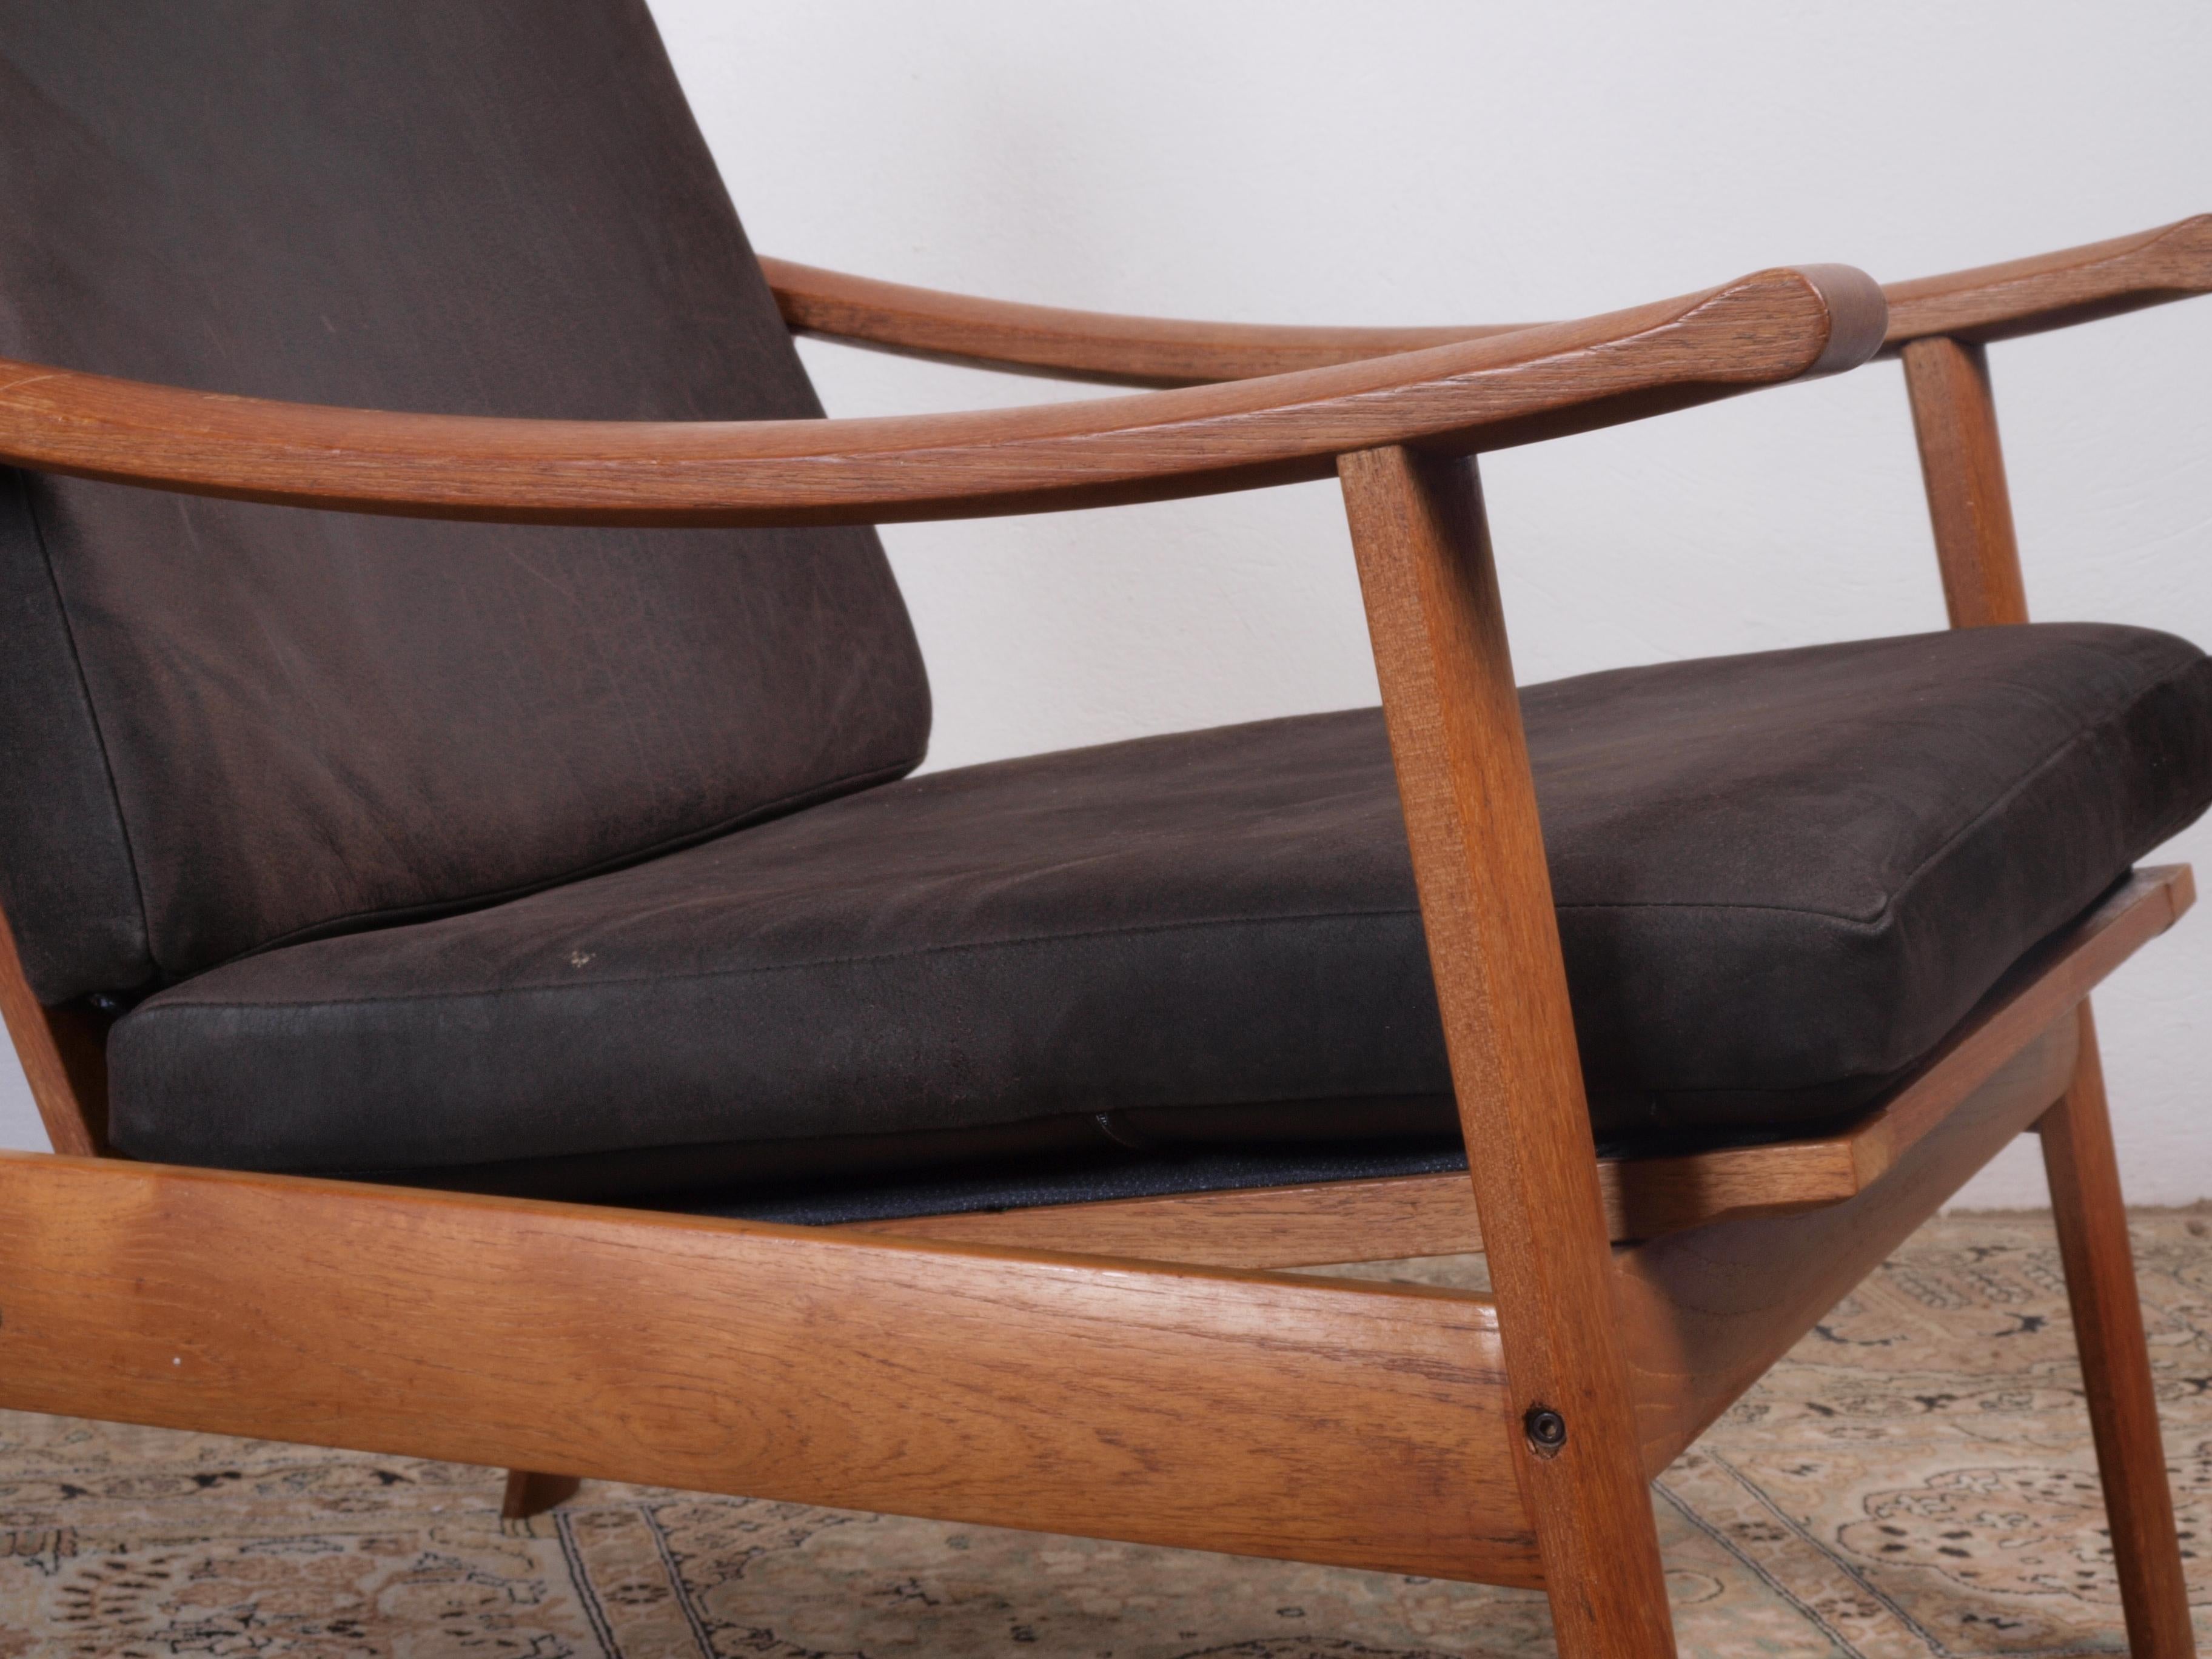 Mid-20th Century 2 Design Mid-Century Lounge Chairs in Teak from Denmark For Sale